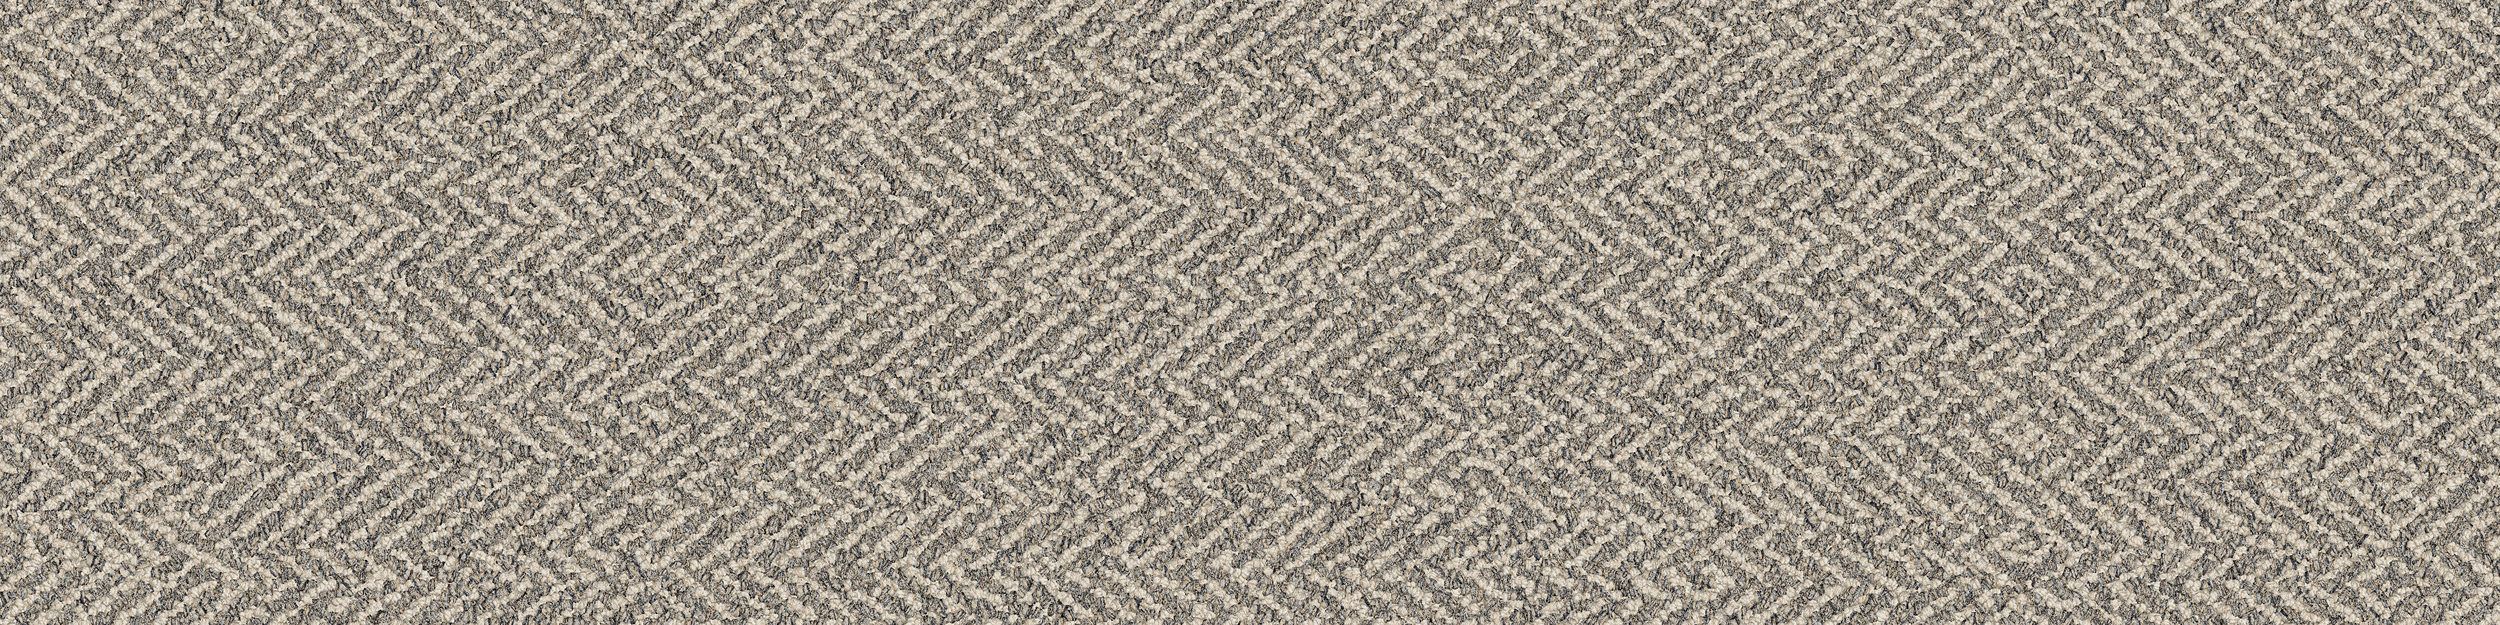 Third Space 308 Carpet Tile in Shell image number 2